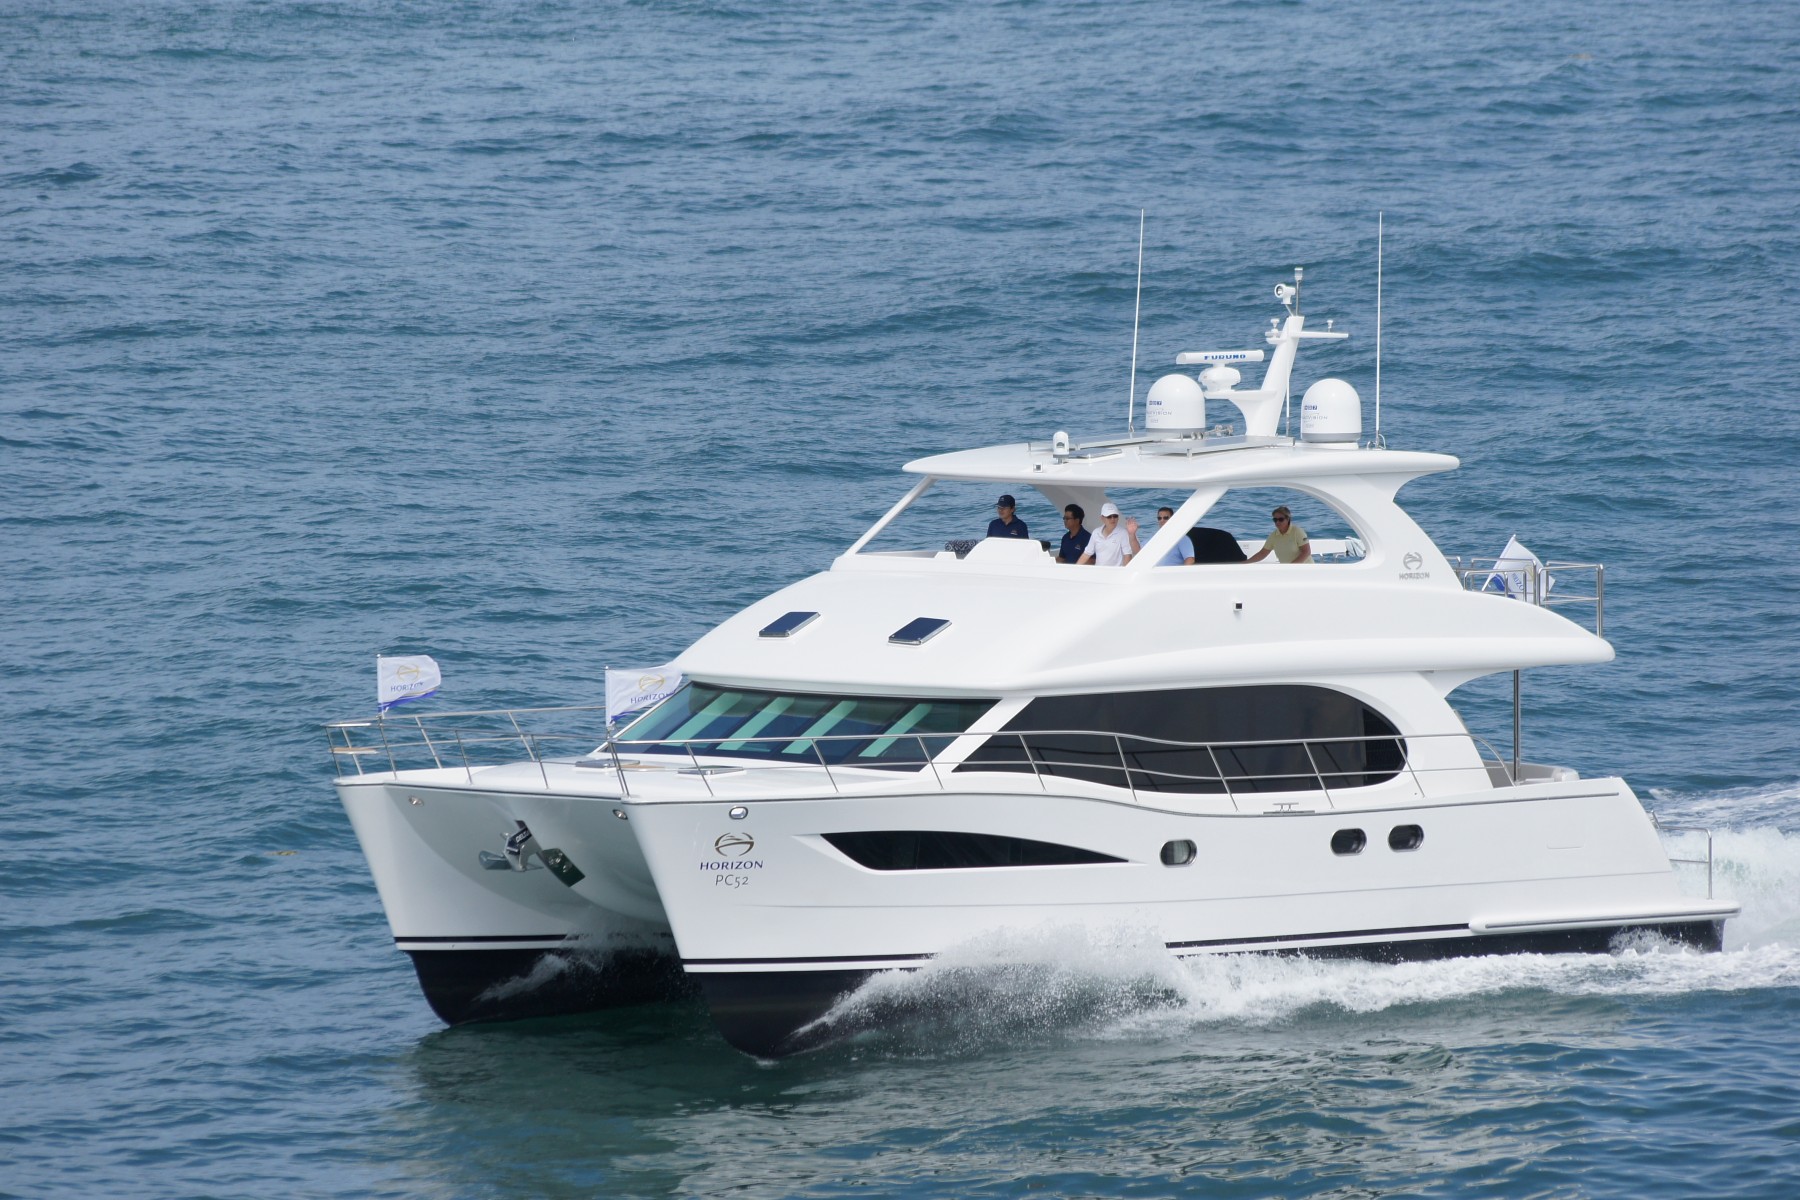 Horizon Power Catamarans Delivers PC52 and PC60 Skylounge Luxury Yachts